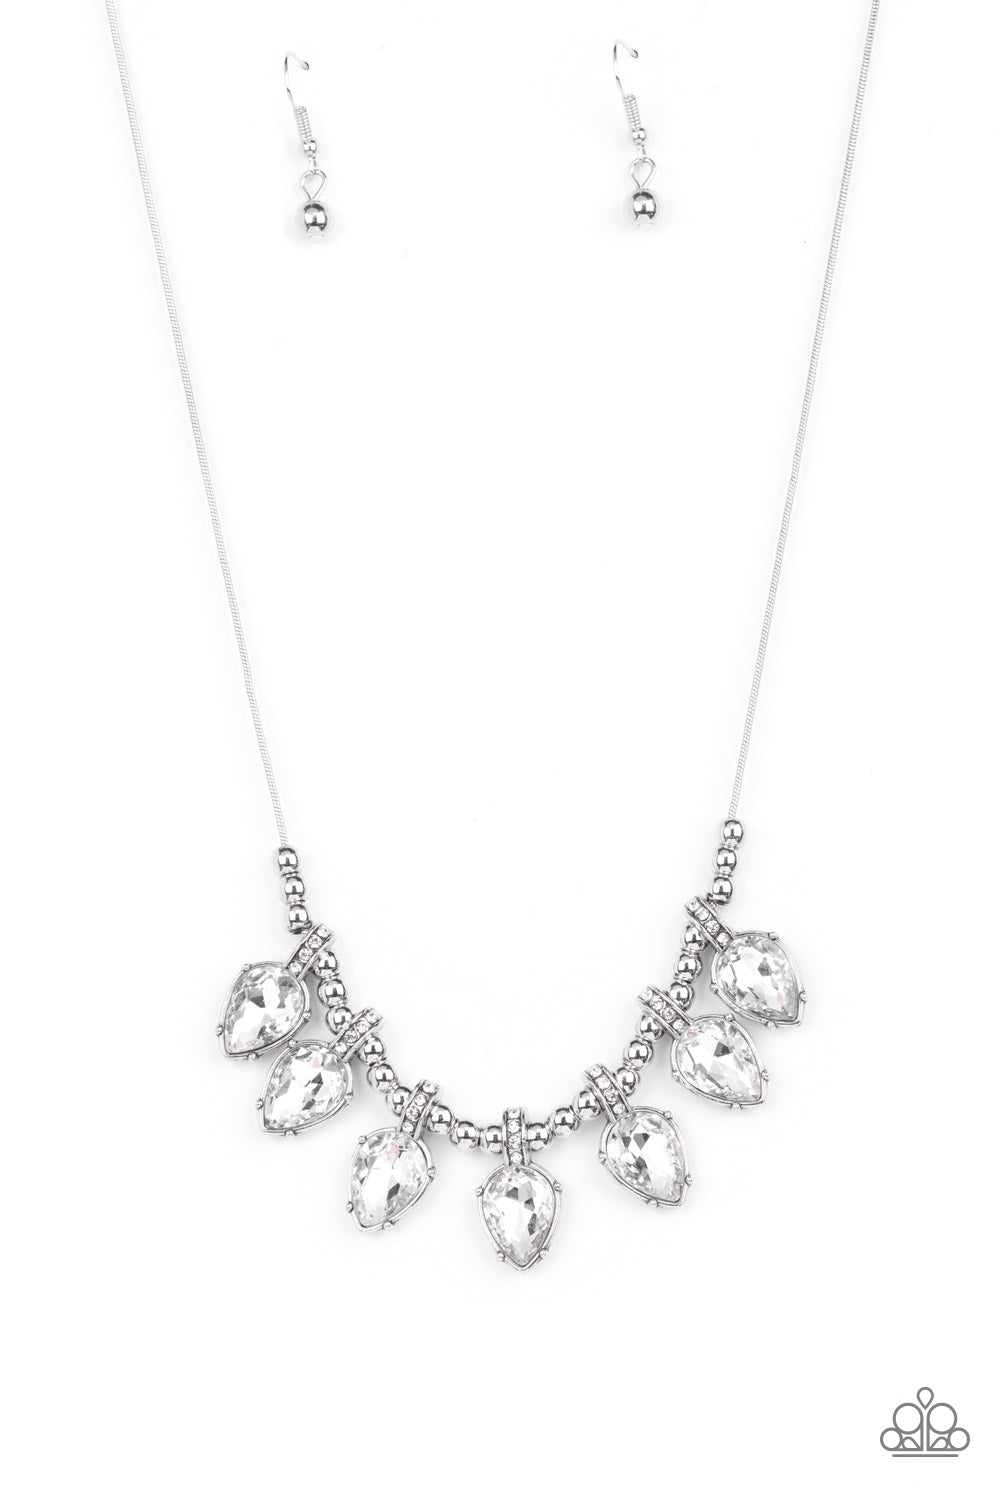 Crown Jewel Couture Necklace (Blue, Green, White)